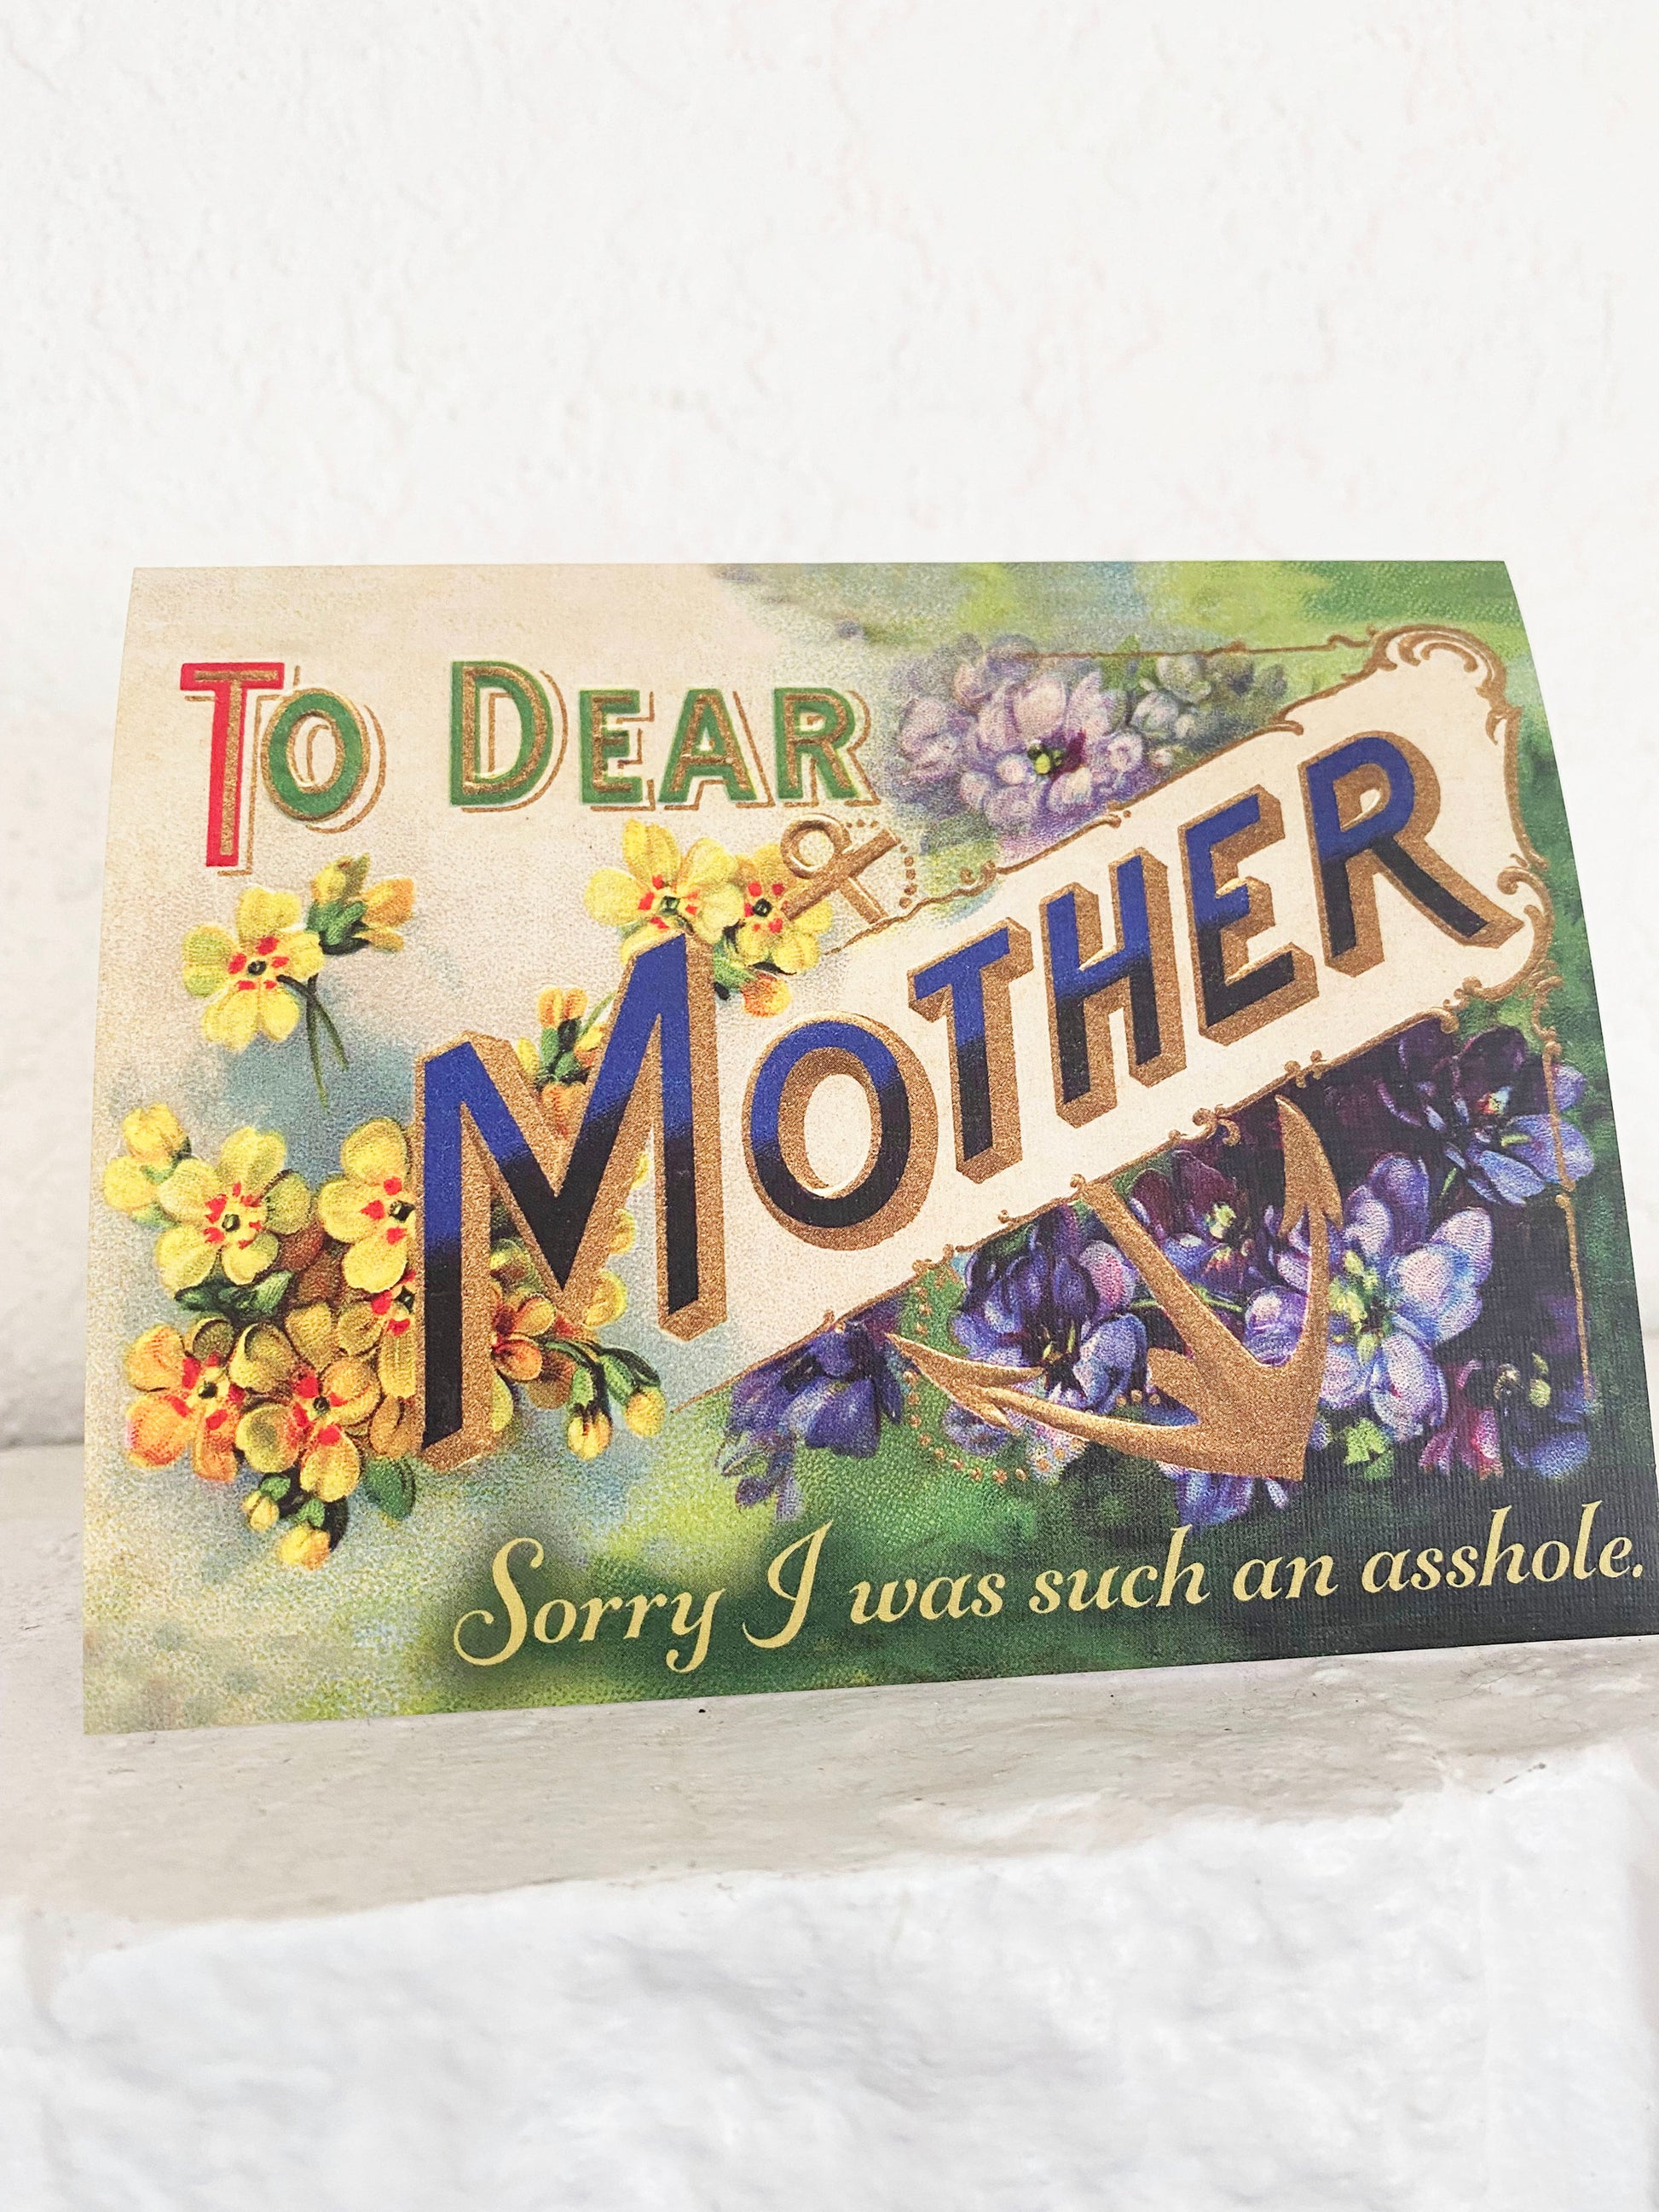 victorian vintage card anchor purple flowers yellow floral garden retro text to dear mother sorry i was such an asshole funny greeting card coin laundry sarcastic snarky sassy mother's day card general purpose birthday just because